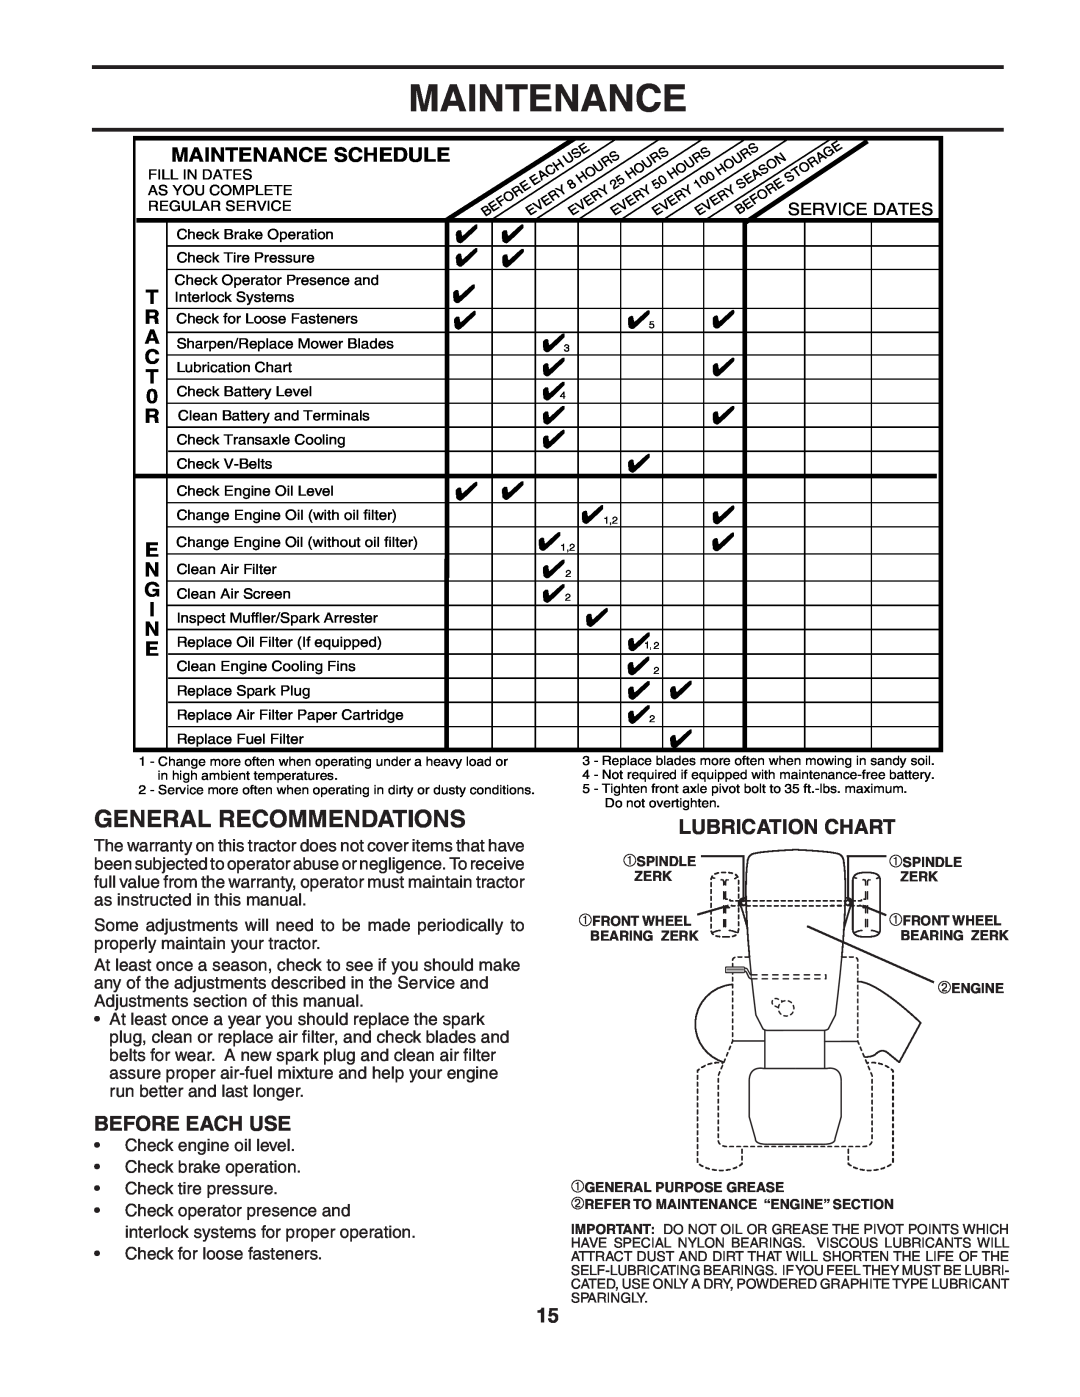 Poulan 190944 owner manual General Recommendations, Lubrication Chart, Before Each Use, Maintenance Schedule 